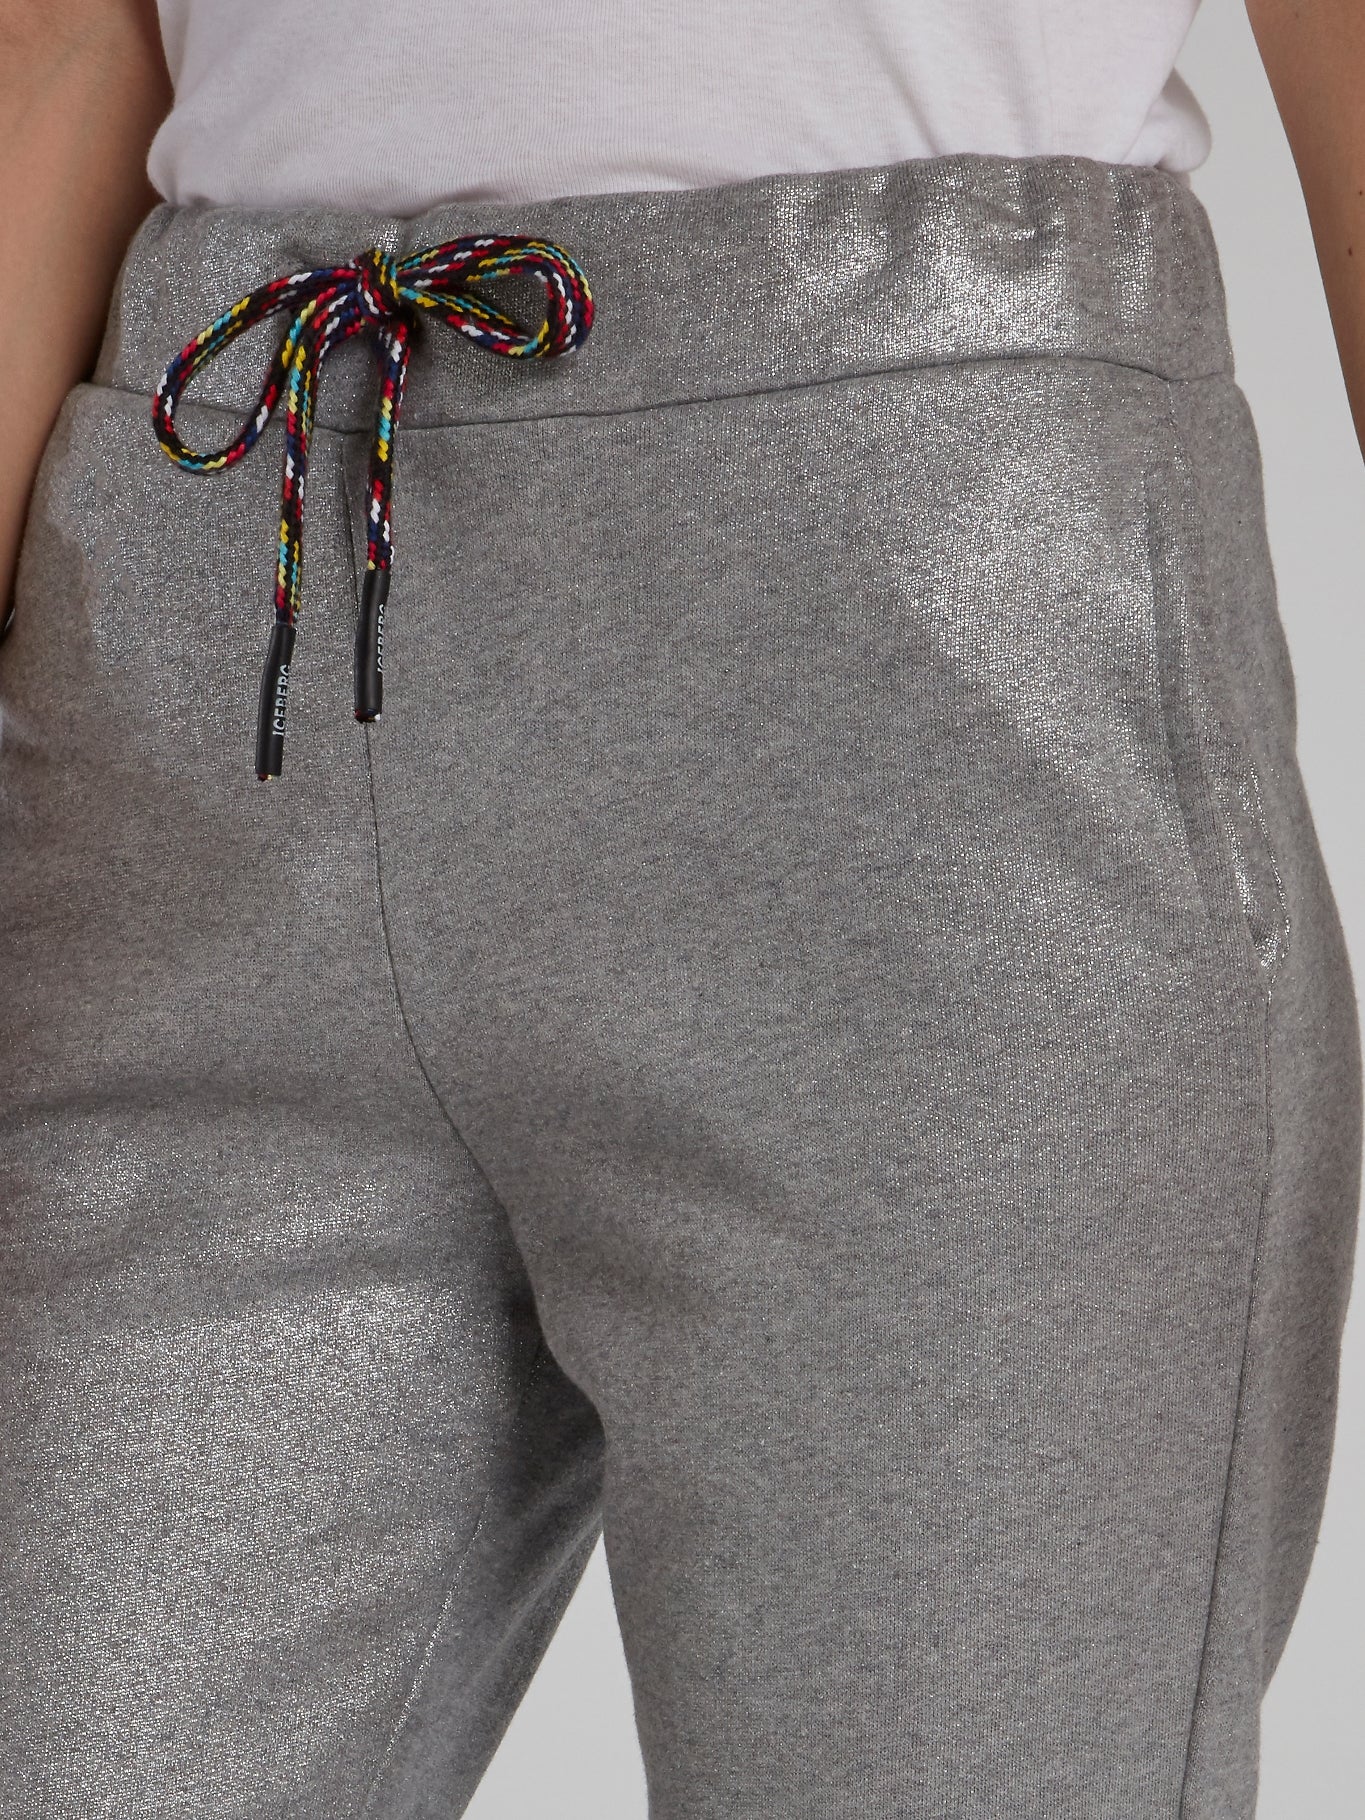 Metallic Patched Track Pants